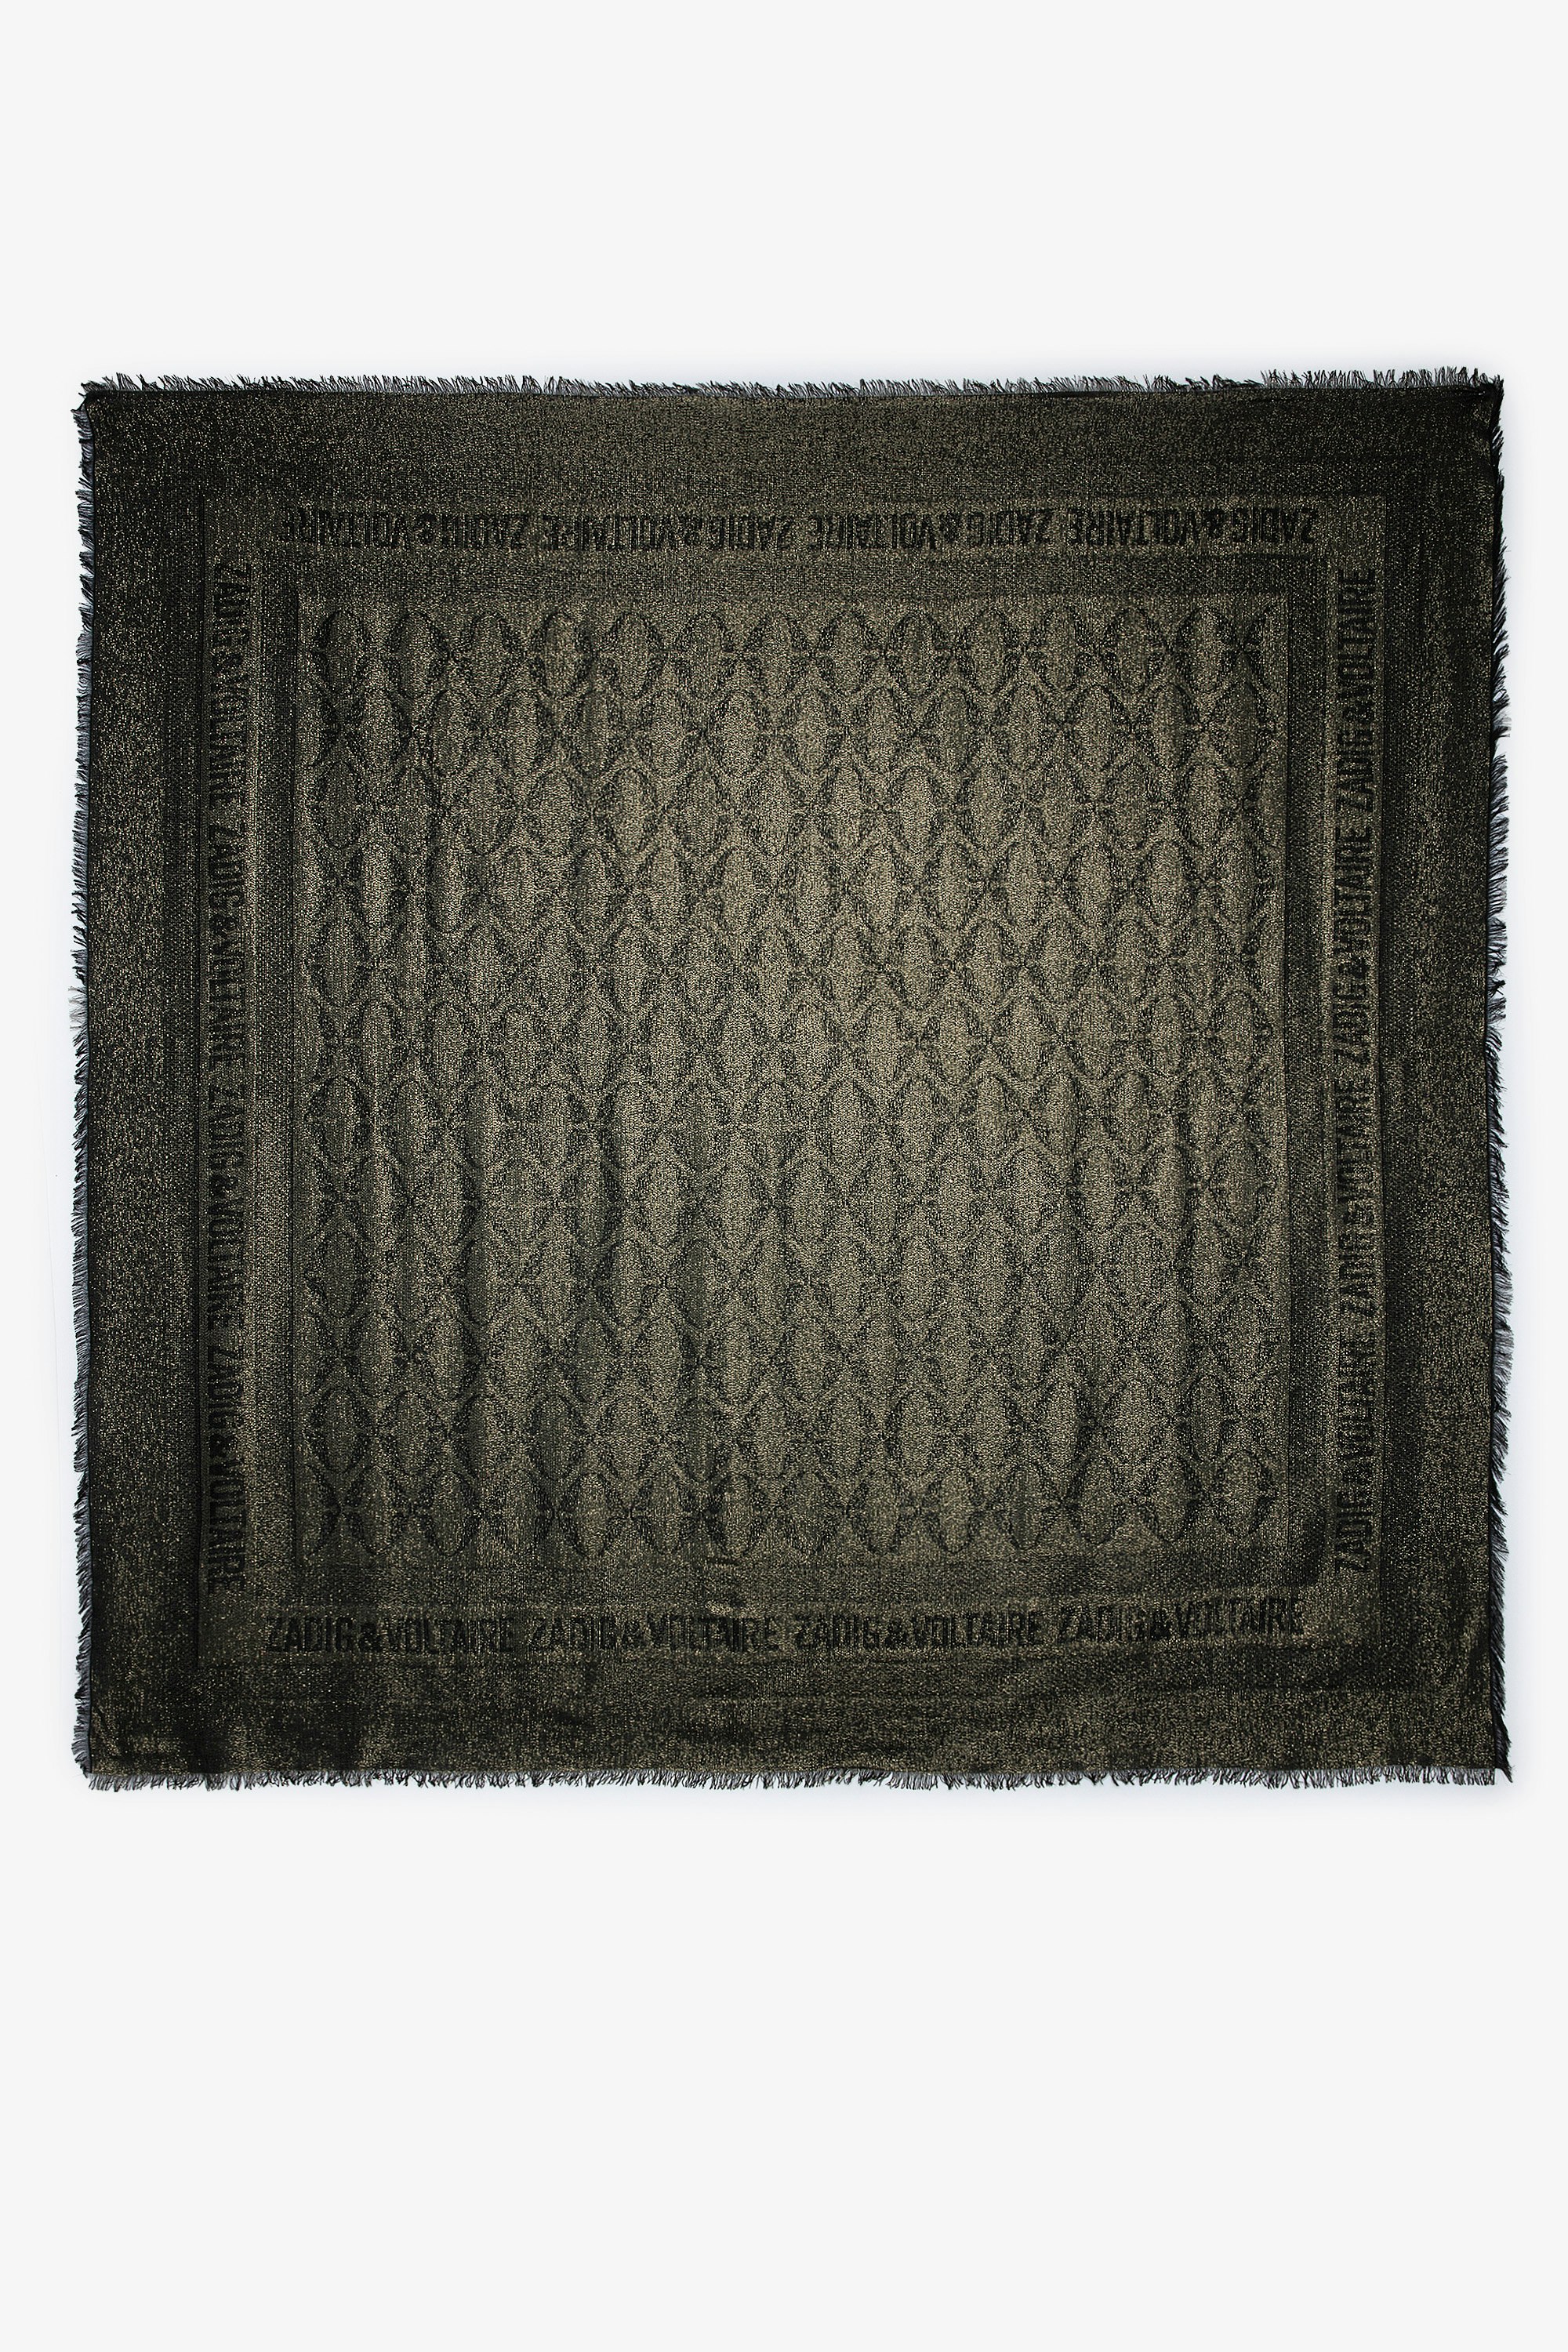 Glenn Scarf - Voltaire Vice square black scarf in gold-effect patterned jacquard with motifs and Zadig&Voltaire signature.